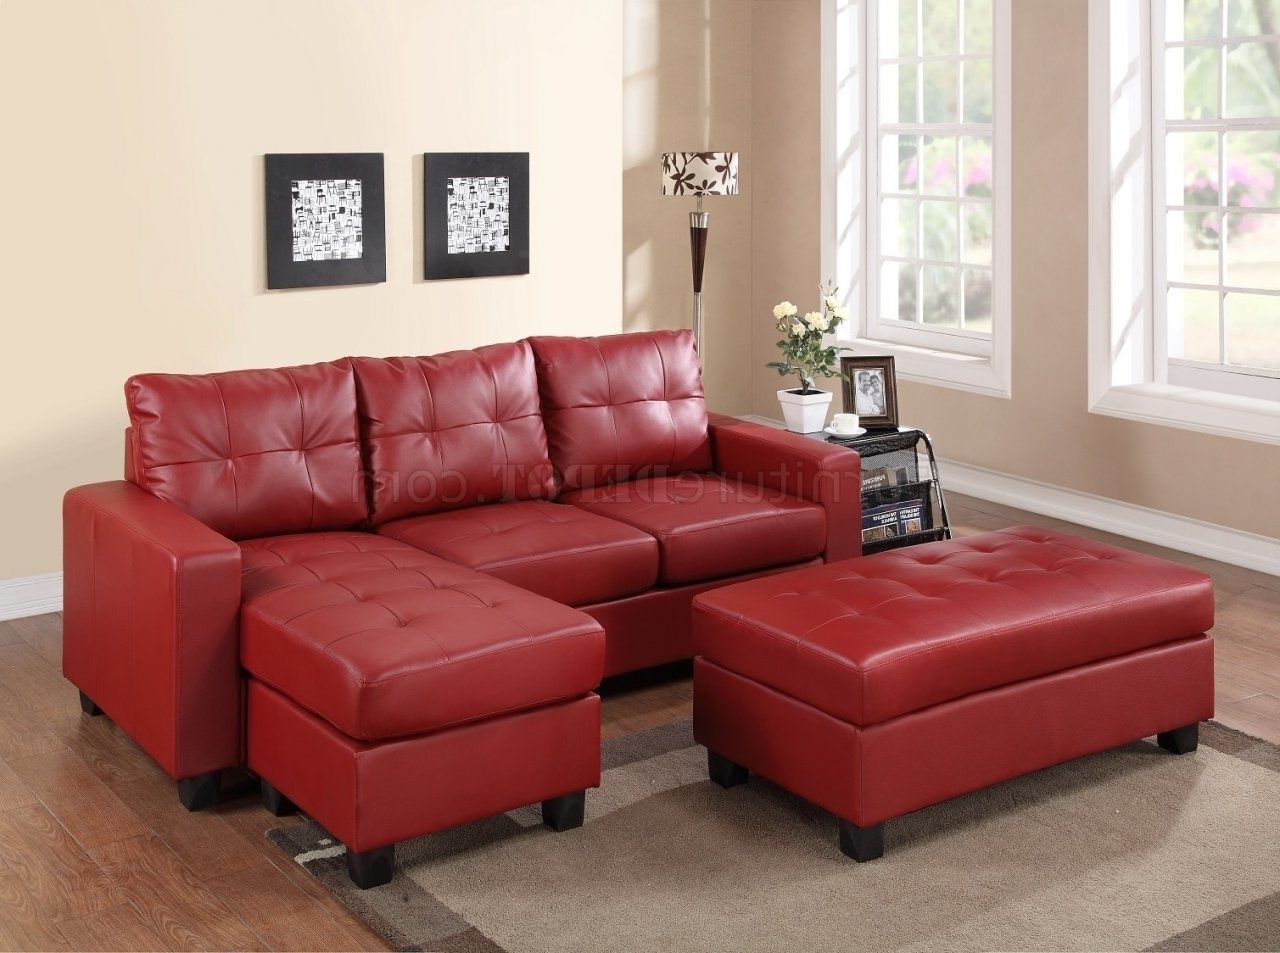 Featured Photo of The 20 Best Collection of Small Red Leather Sectional Sofas